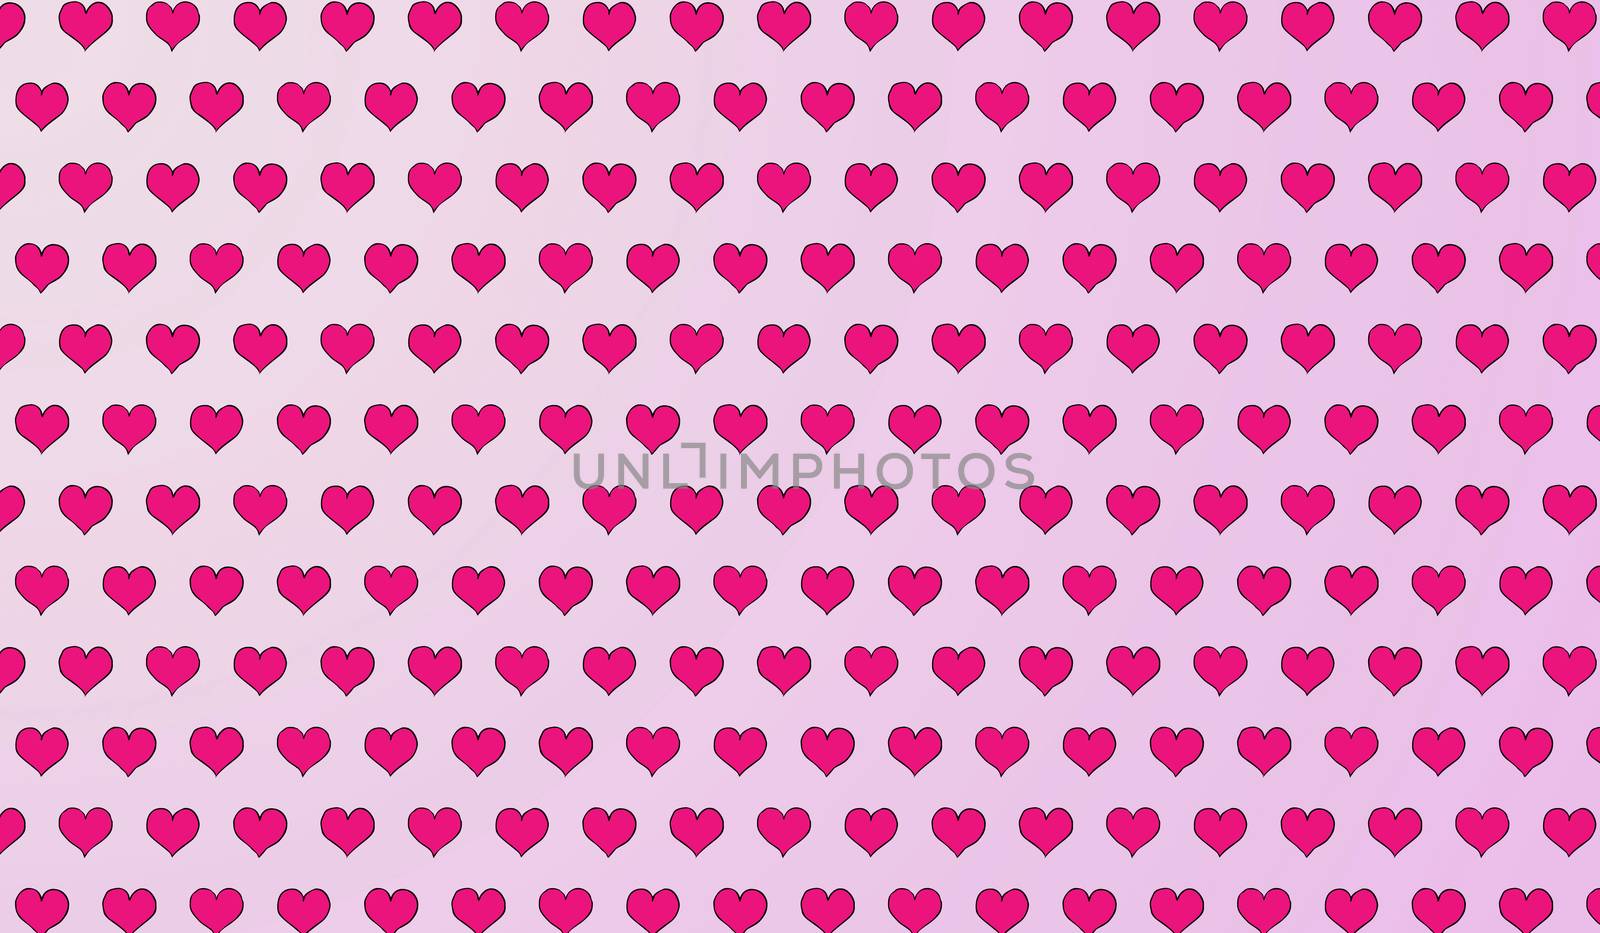 2d pink pattern of cartoon hearts on isolated background by Andreajk3